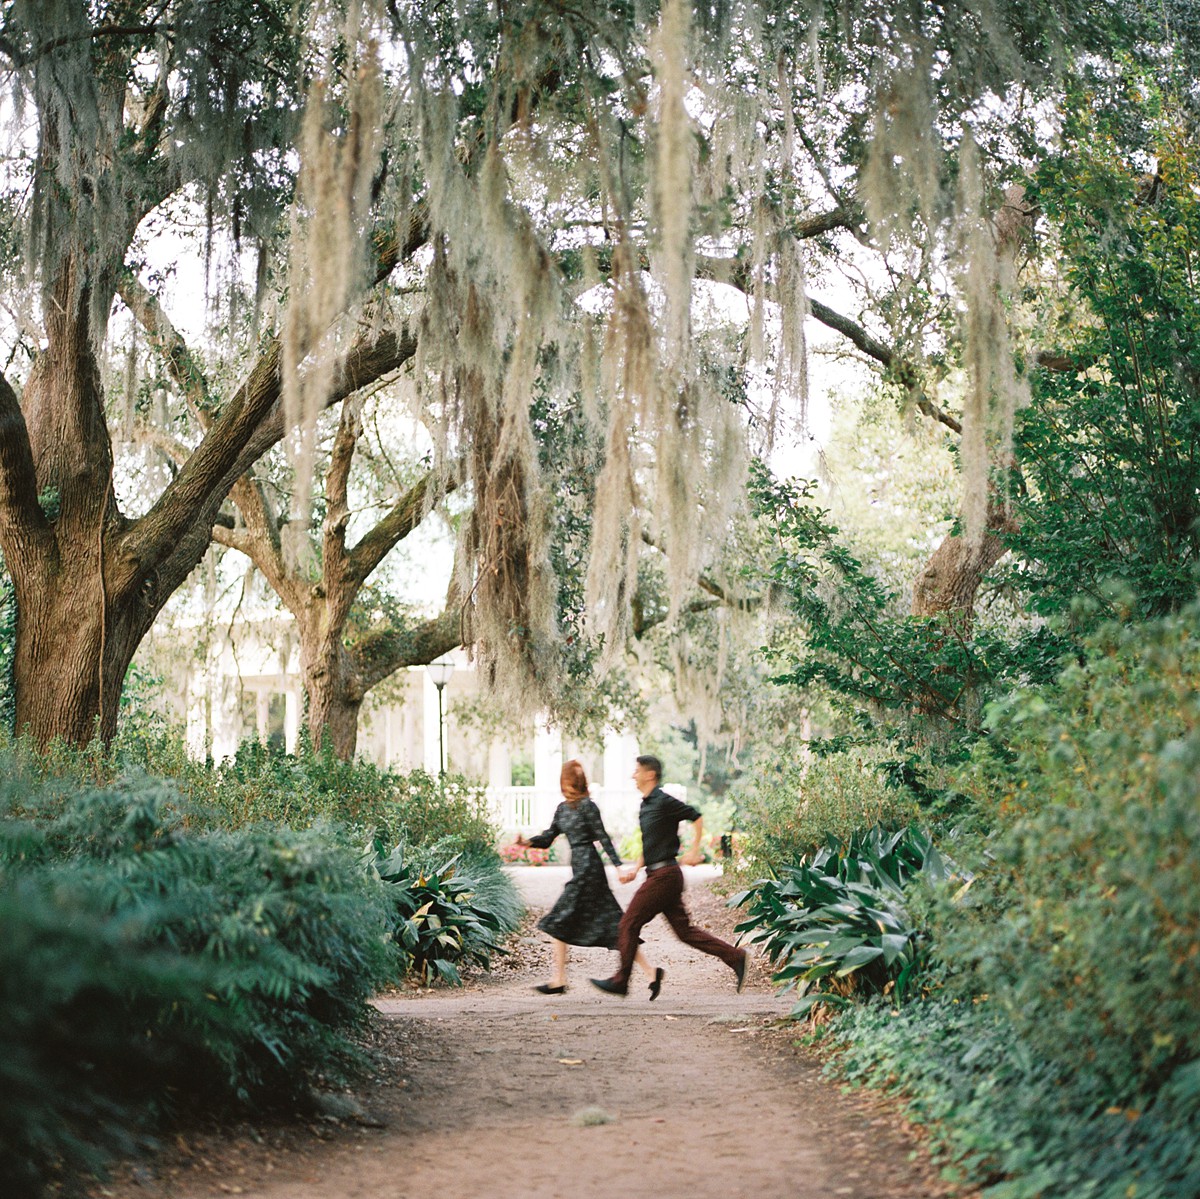 couple running through oak trees in downtown charleston sc for anniversary portrait session on kodak portra 800 film and hasselblad